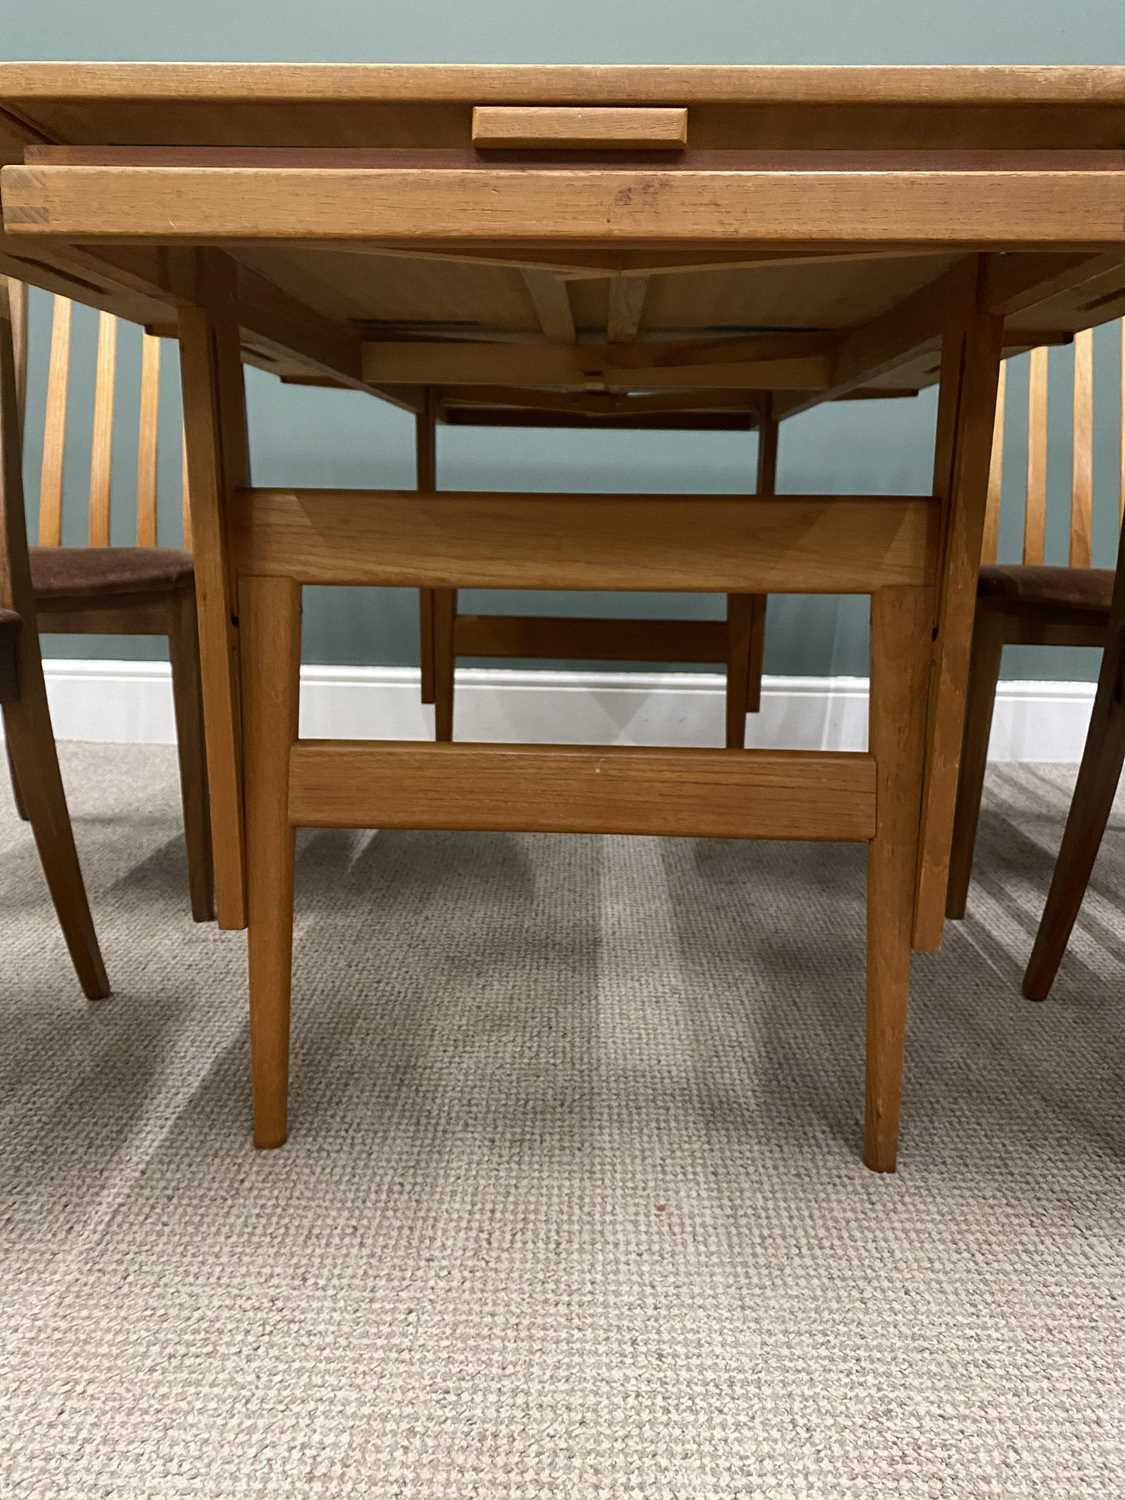 MID-CENTURY EXTENDING TABLE & FOUR CHAIRS, 72 (h) x 150 (w) x 105cms (d) open, 58cms closed - Image 2 of 3